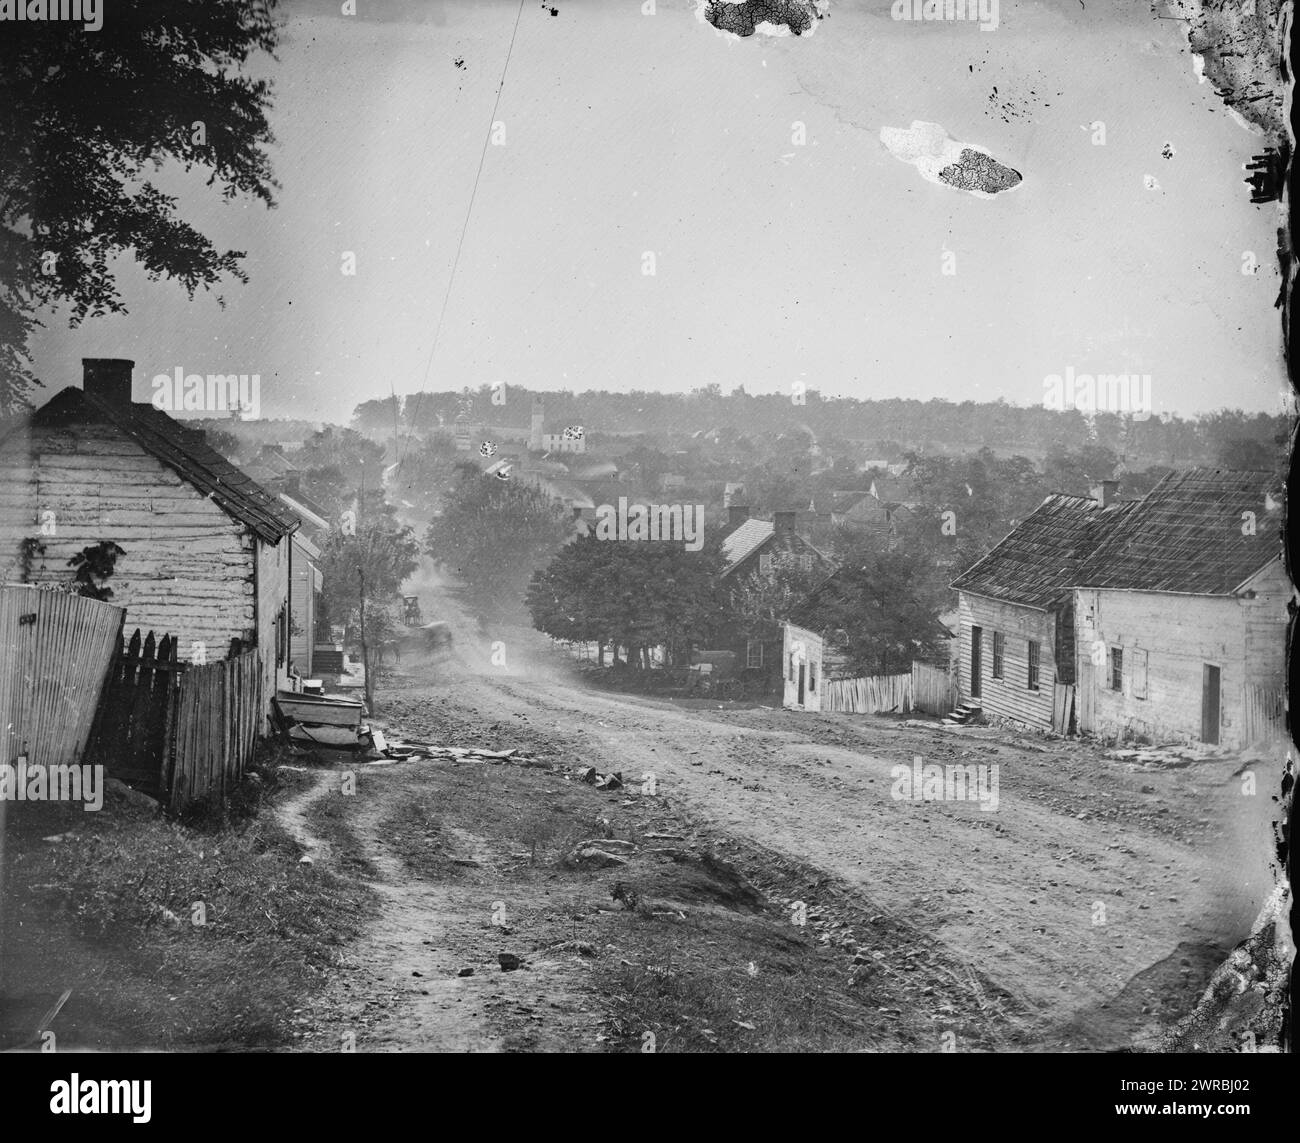 Sharpsburg, Md. Principal street, Photograph from the main eastern theater of the war, Battle of Antietam, September-October 1862., Gardner, Alexander, 1821-1882, photographer, 1862 September., United States, History, Civil War, 1861-1865, Glass negatives, 1860-1870, Stereographs, 1860-1870, 1 negative: glass, stereograph, wet collodion, 4 x 10 in Stock Photo